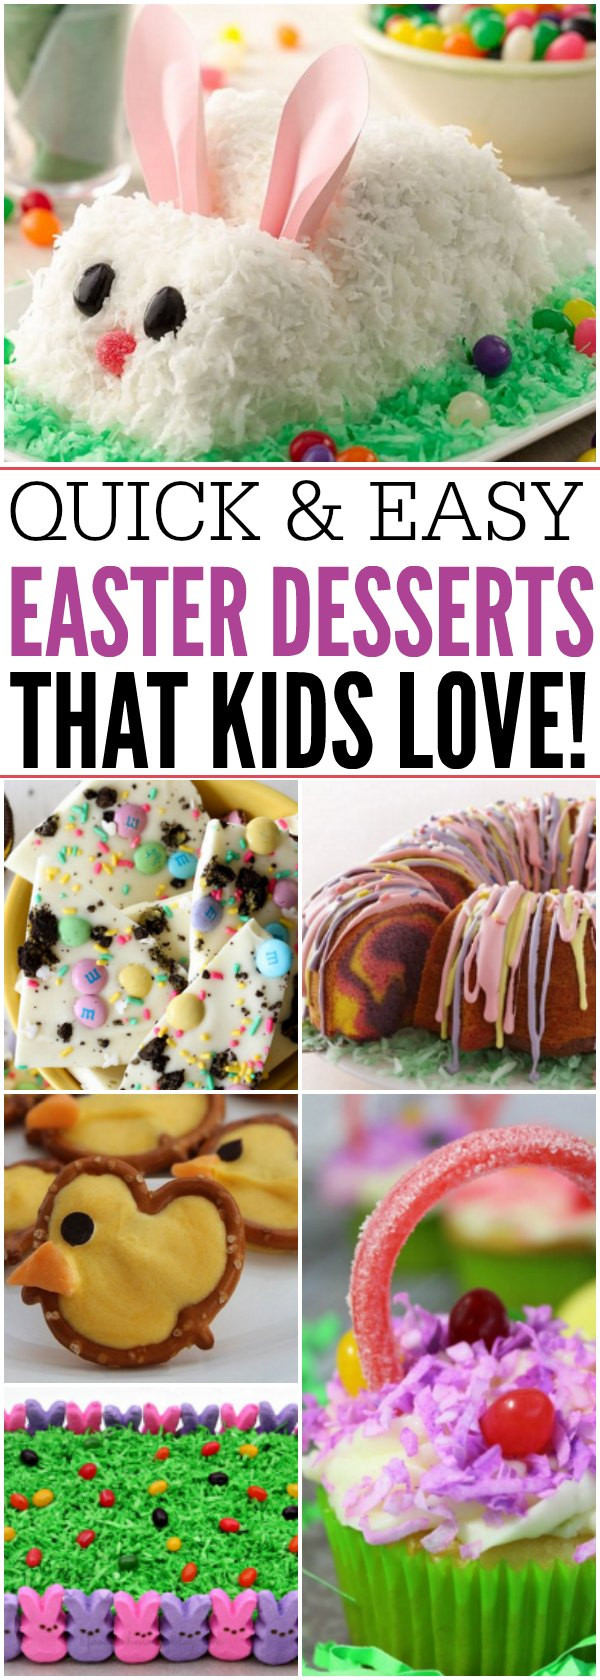 Quick Easy Easter Desserts
 16 Quick and Easy Easter Dessert Recipes That Everyone